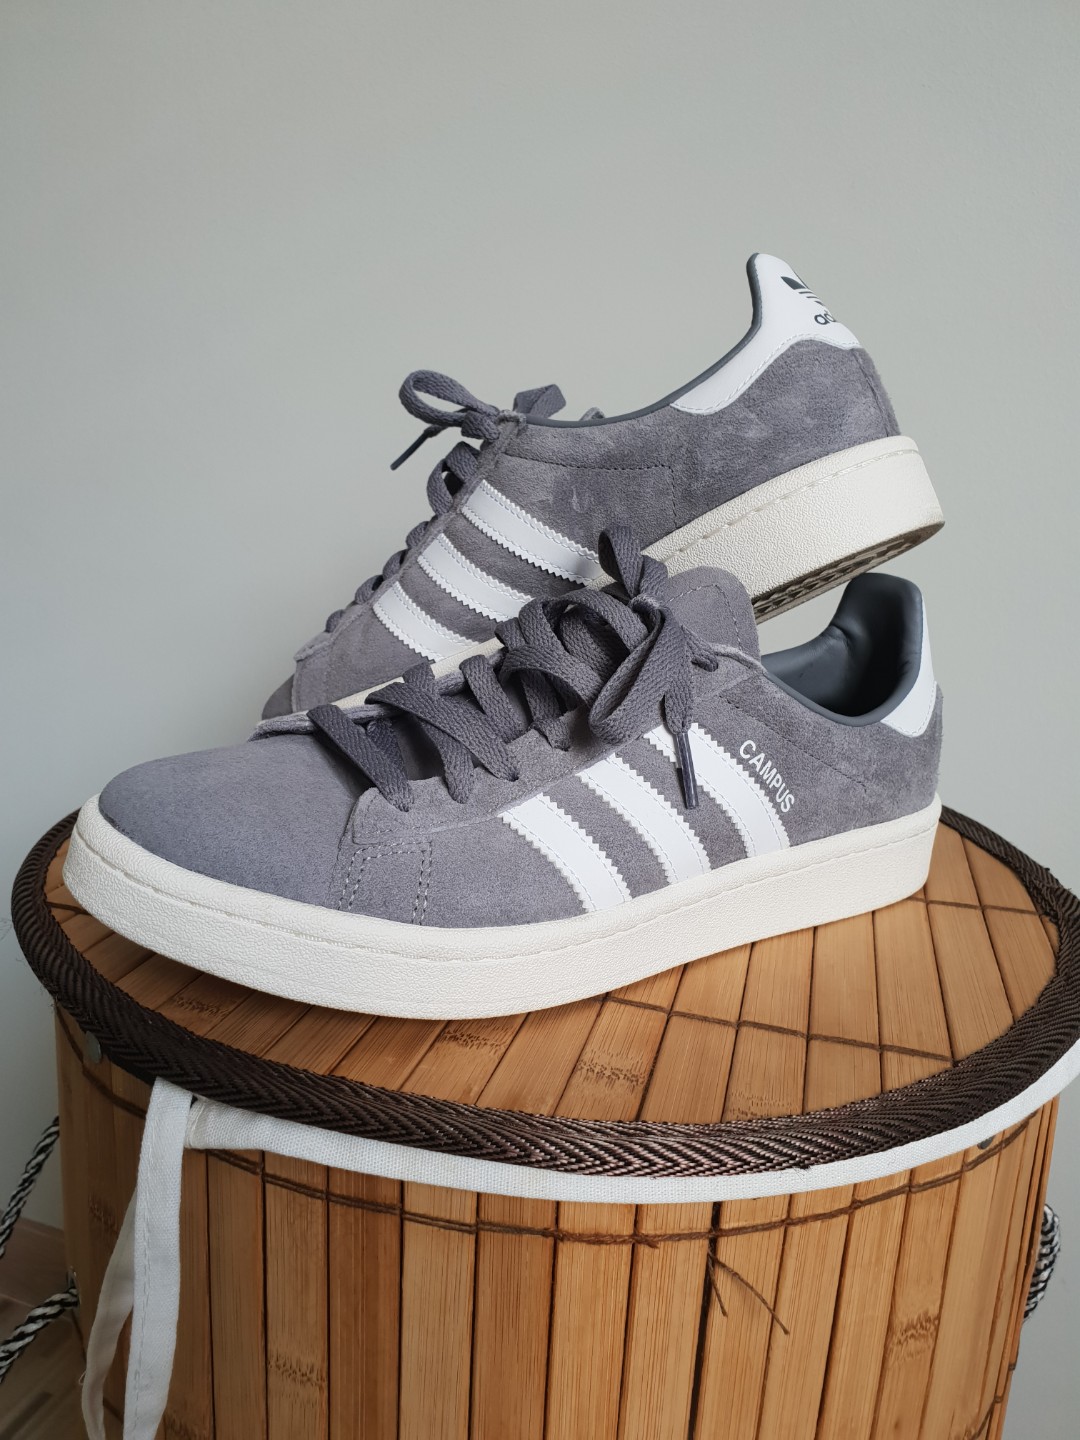 Adidas Campus (Mens), Men's Fashion, Footwear, Sneakers on Carousell